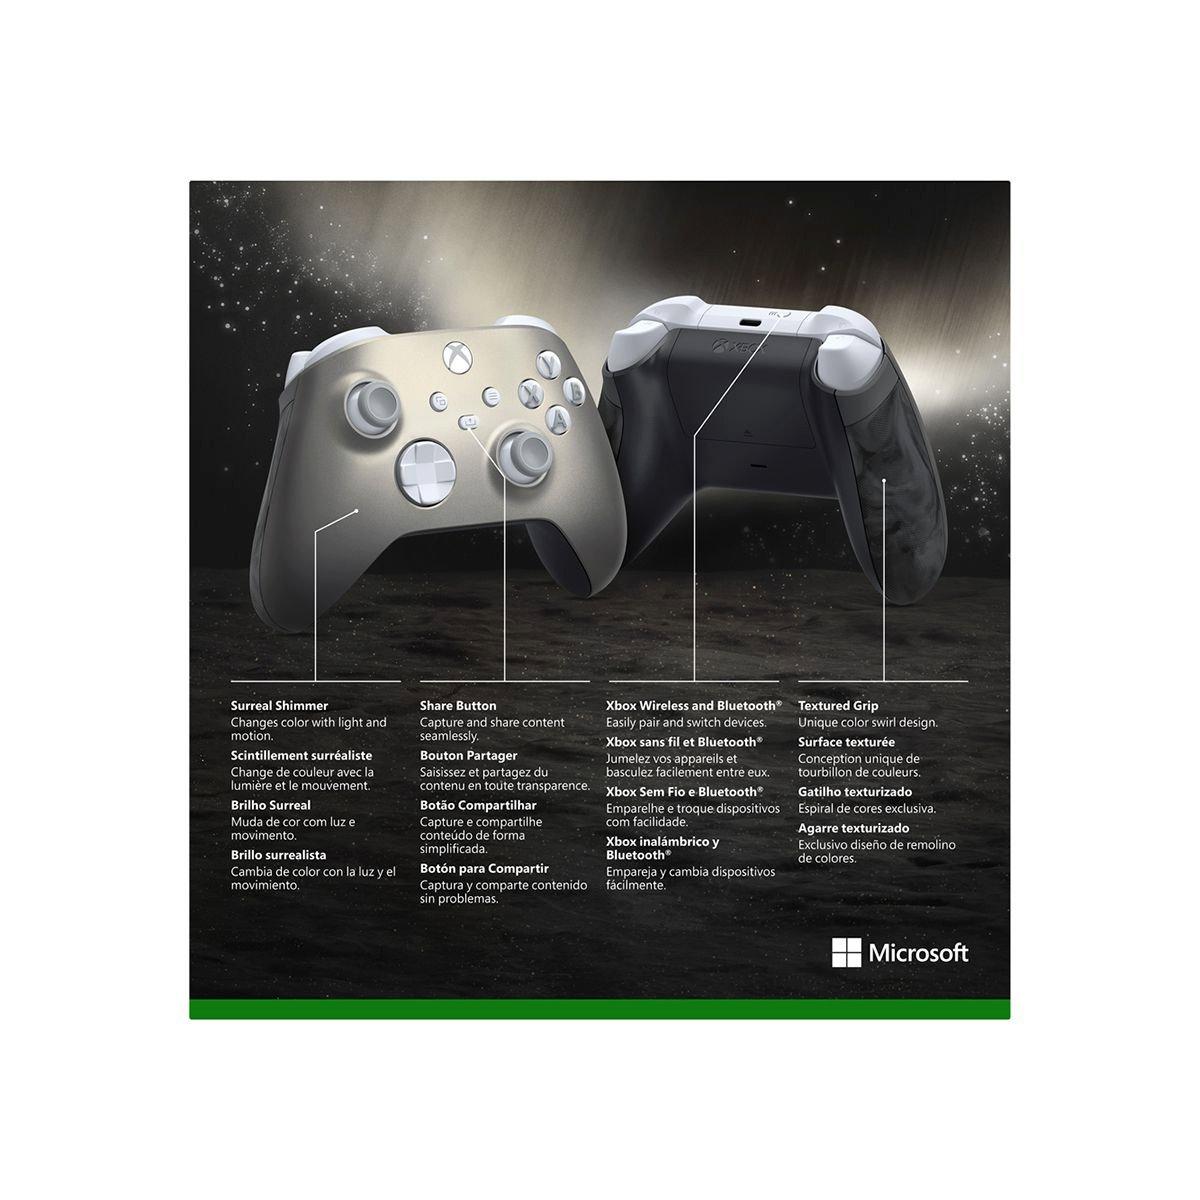  Xbox Special Edition Wireless Gaming Controller – Remix –  Includes Xbox Rechargeable Battery Pack – Xbox Series X